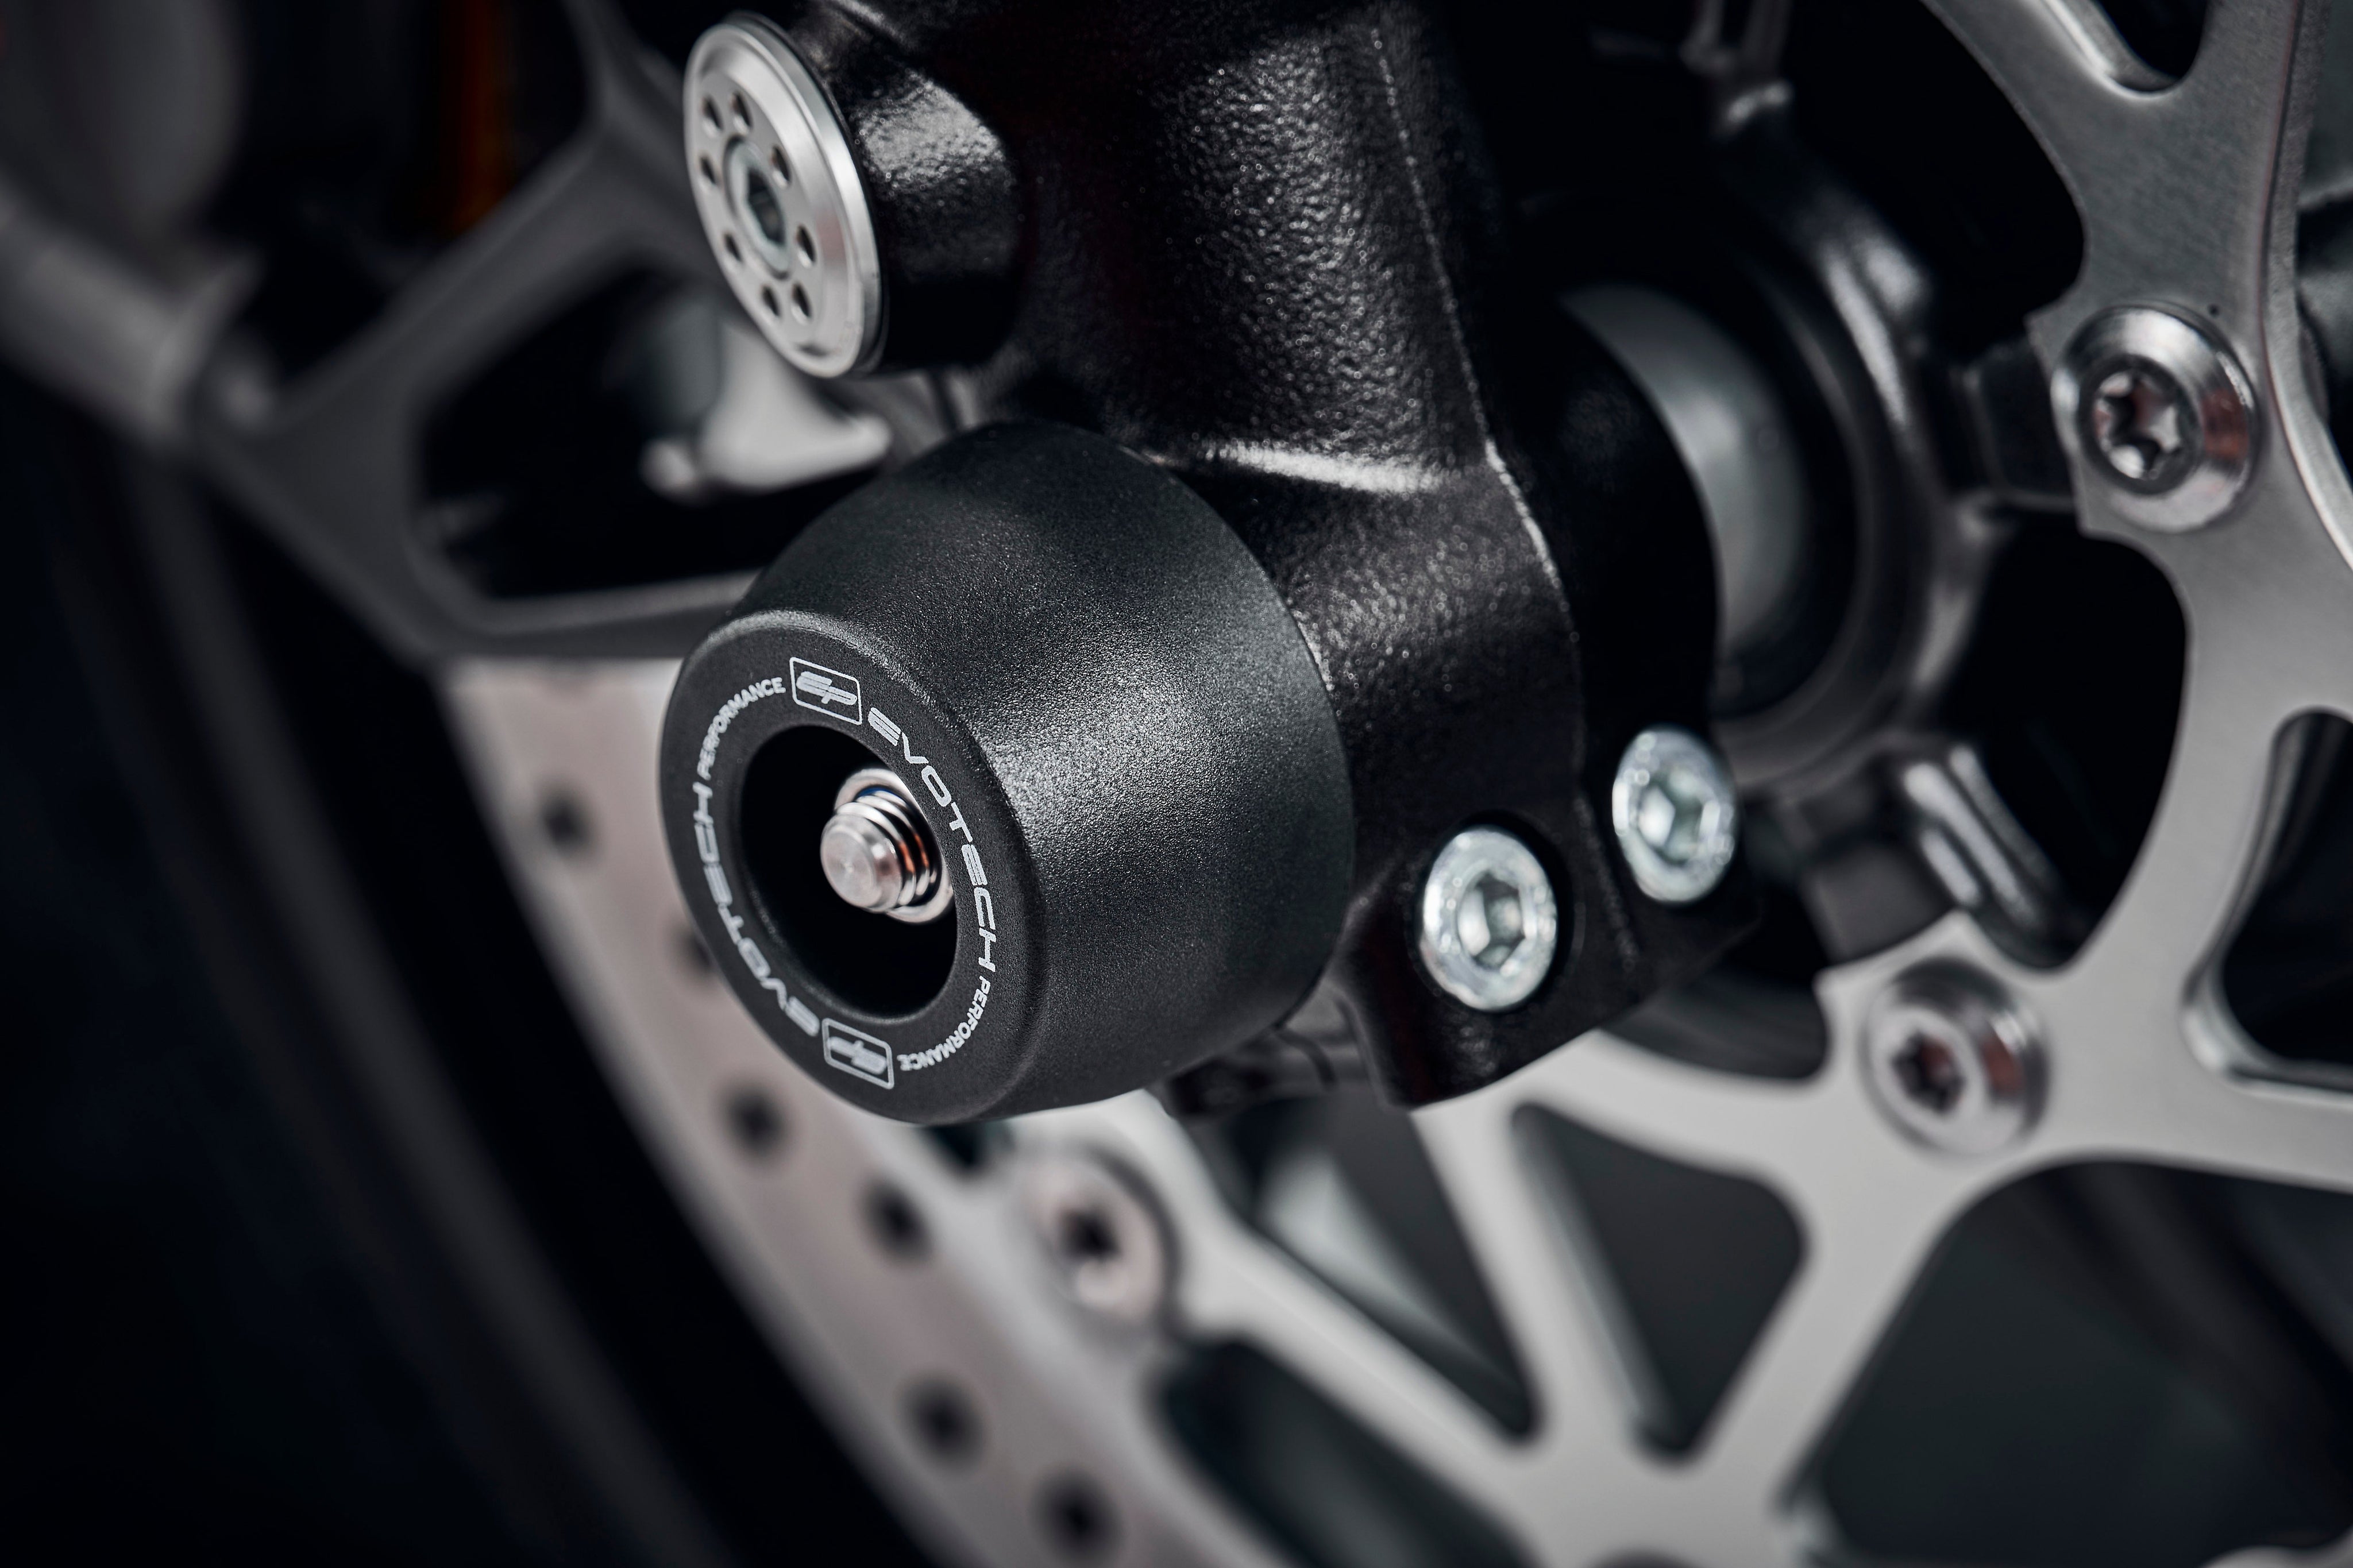 For hard-wearing front fork and brake caliper protection of the Street Triple, choose EP Front Spindle Bobbins for the Triumph Street Triple RS (2017-2019). Evotech Performanceâs strong crash protection is made in the UK.